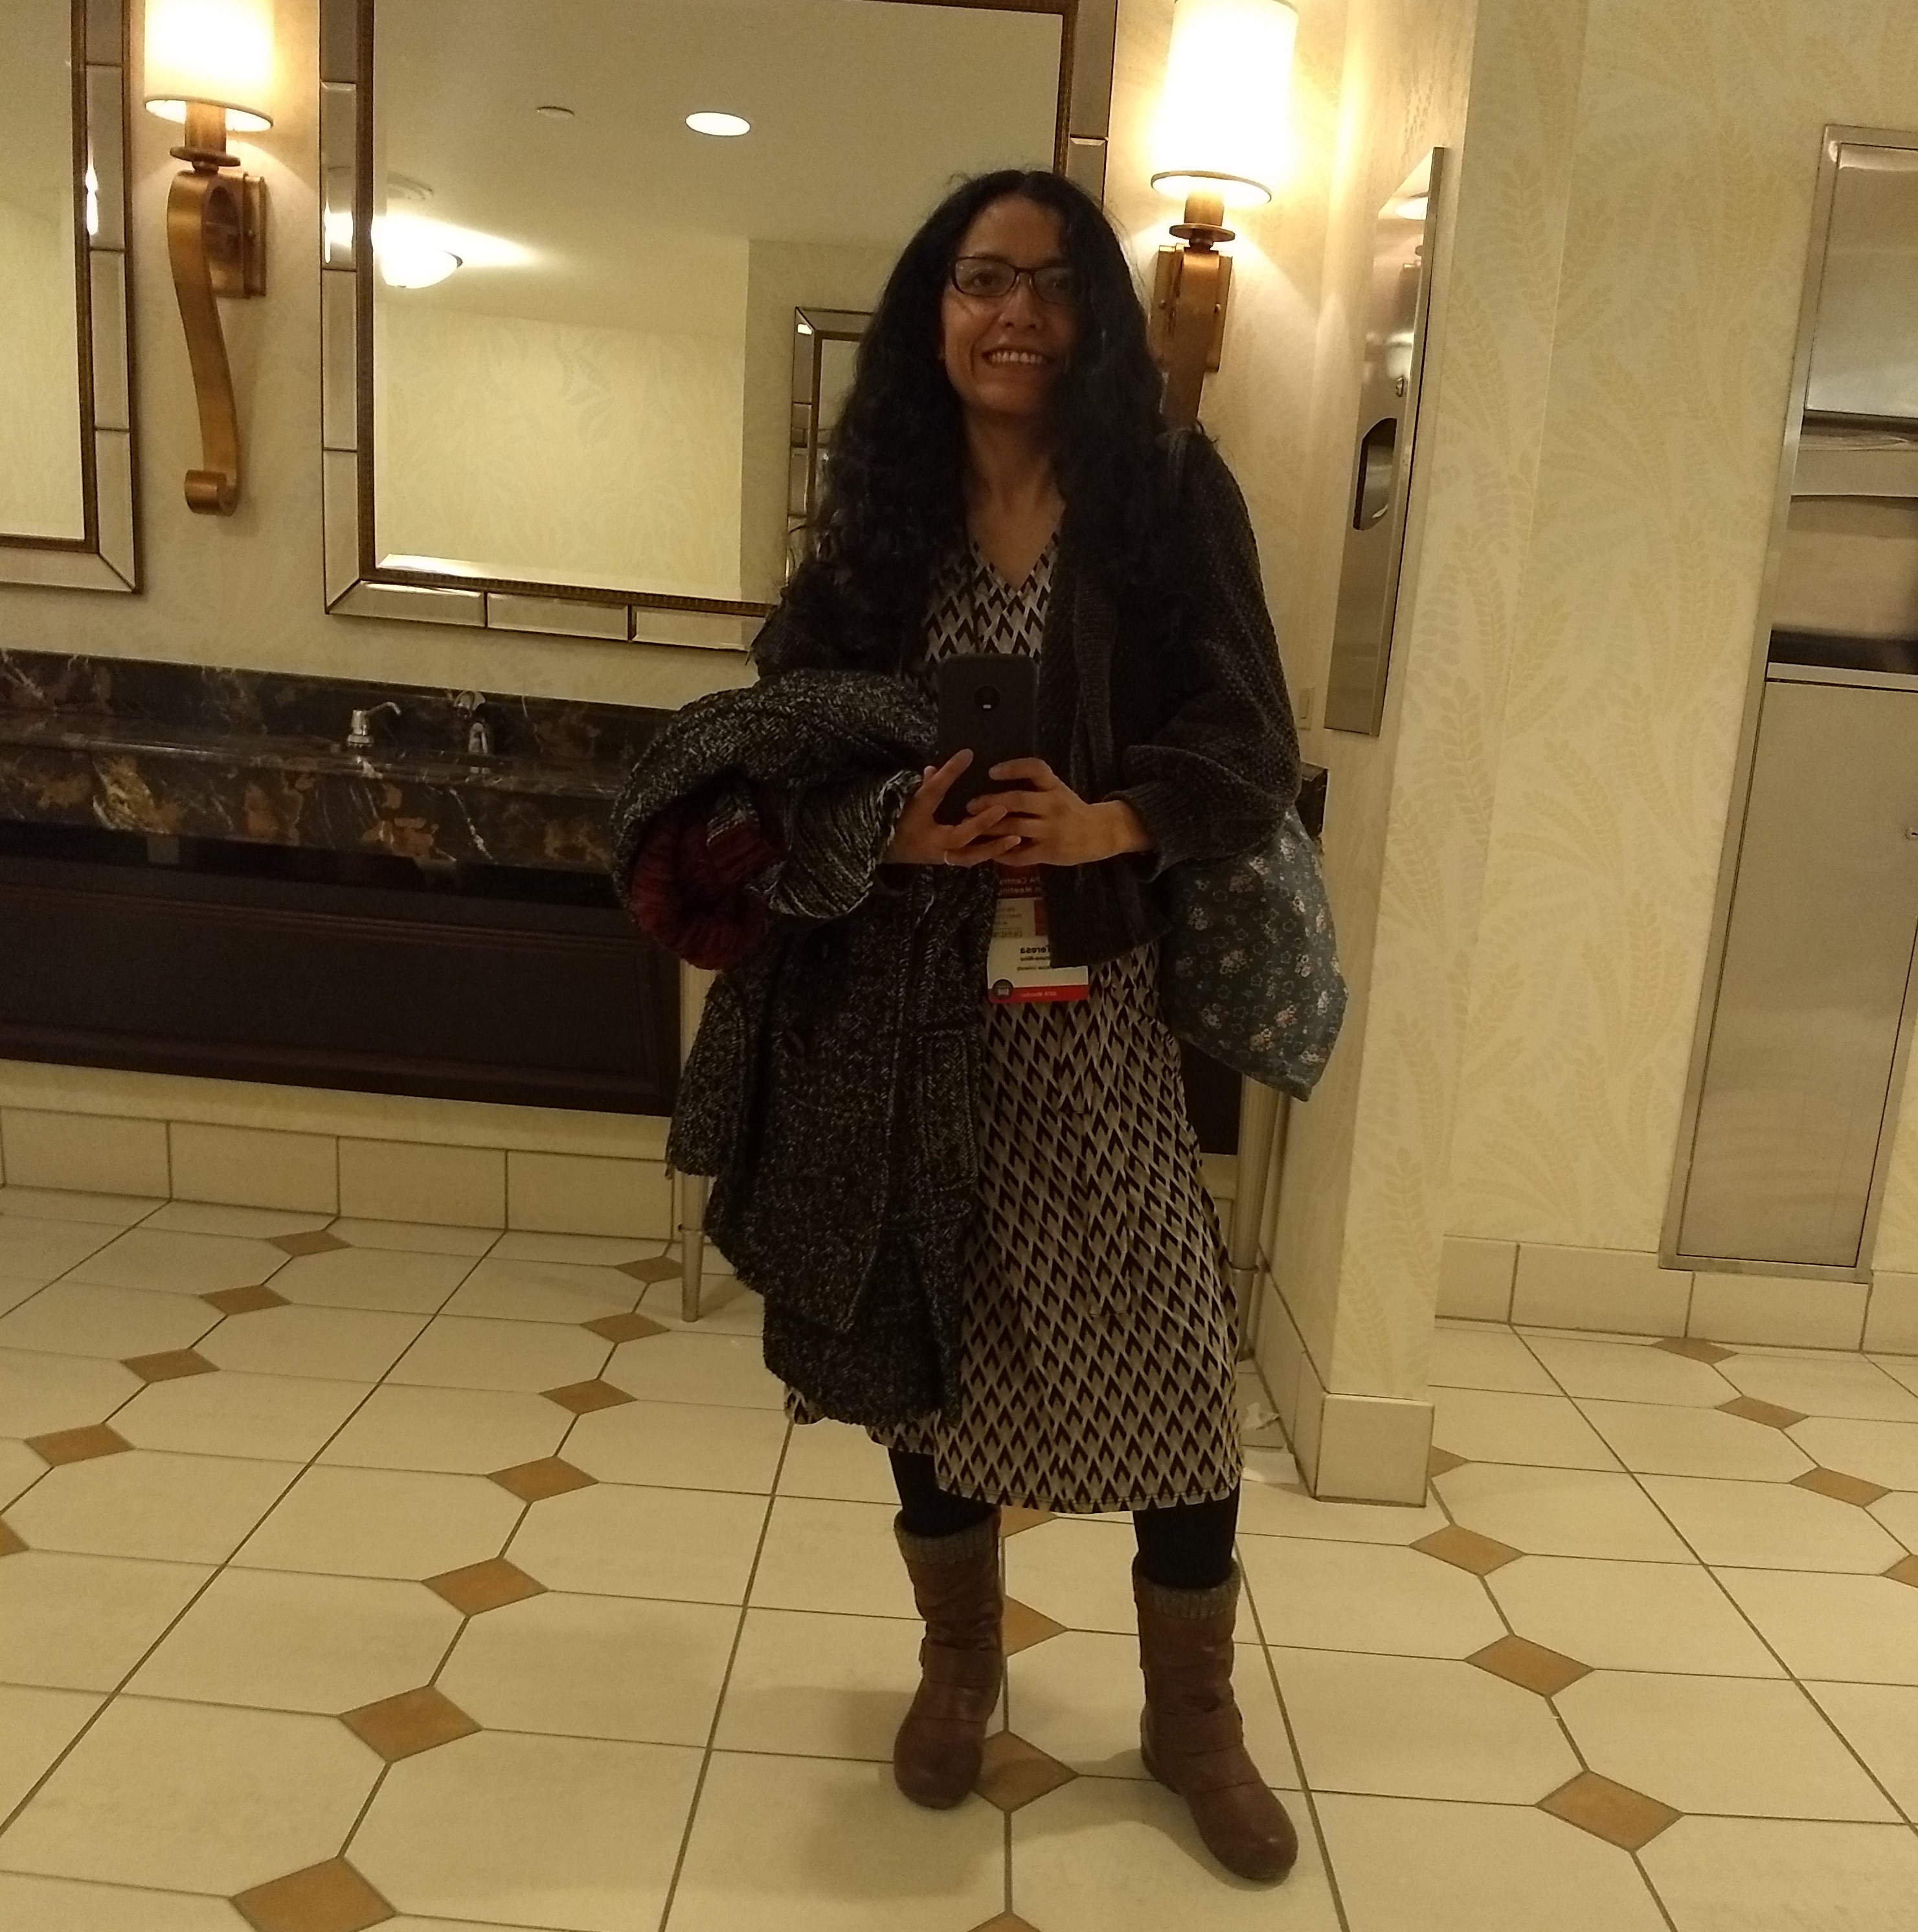 Image of Teresa Bruno Nino reflected in a restroom mirror in the hotel conference at the Central APA 2019 in Chicago. Teresa Bruno Nino is holding her winter coat, taking the selfie and carrying a bag. She has long dark hair. She’s wearing glasses, a dress and boots.  